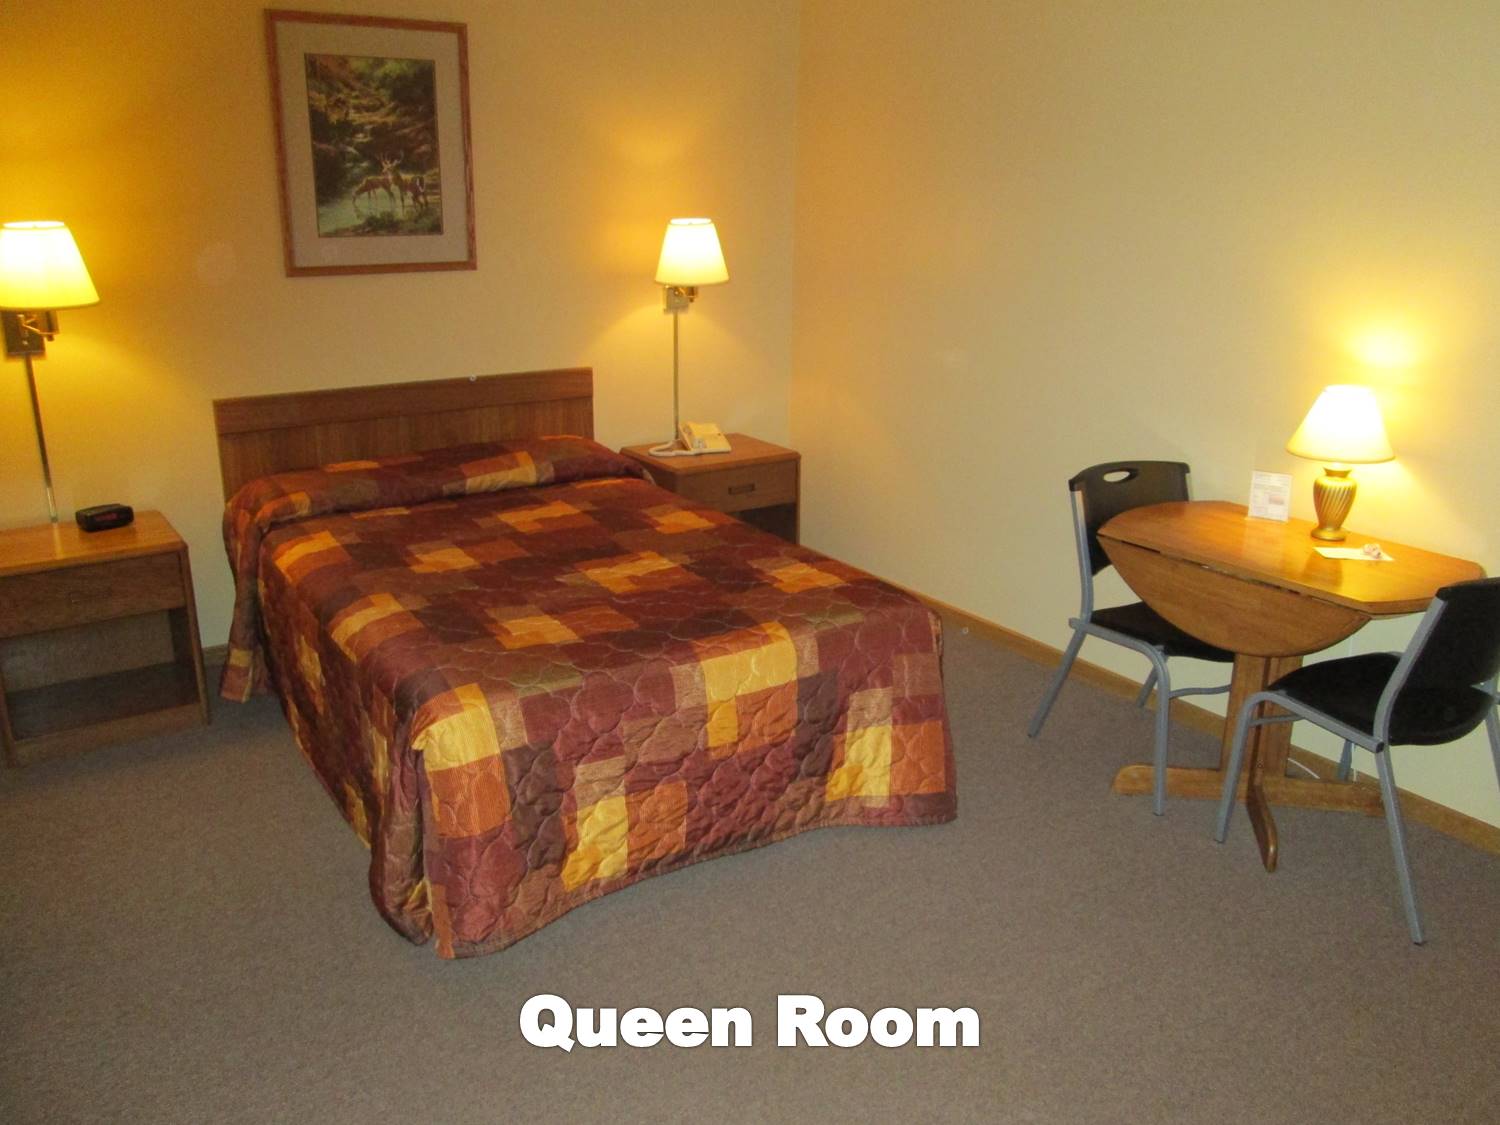 Room with one queen bed and appropriate furnishings.